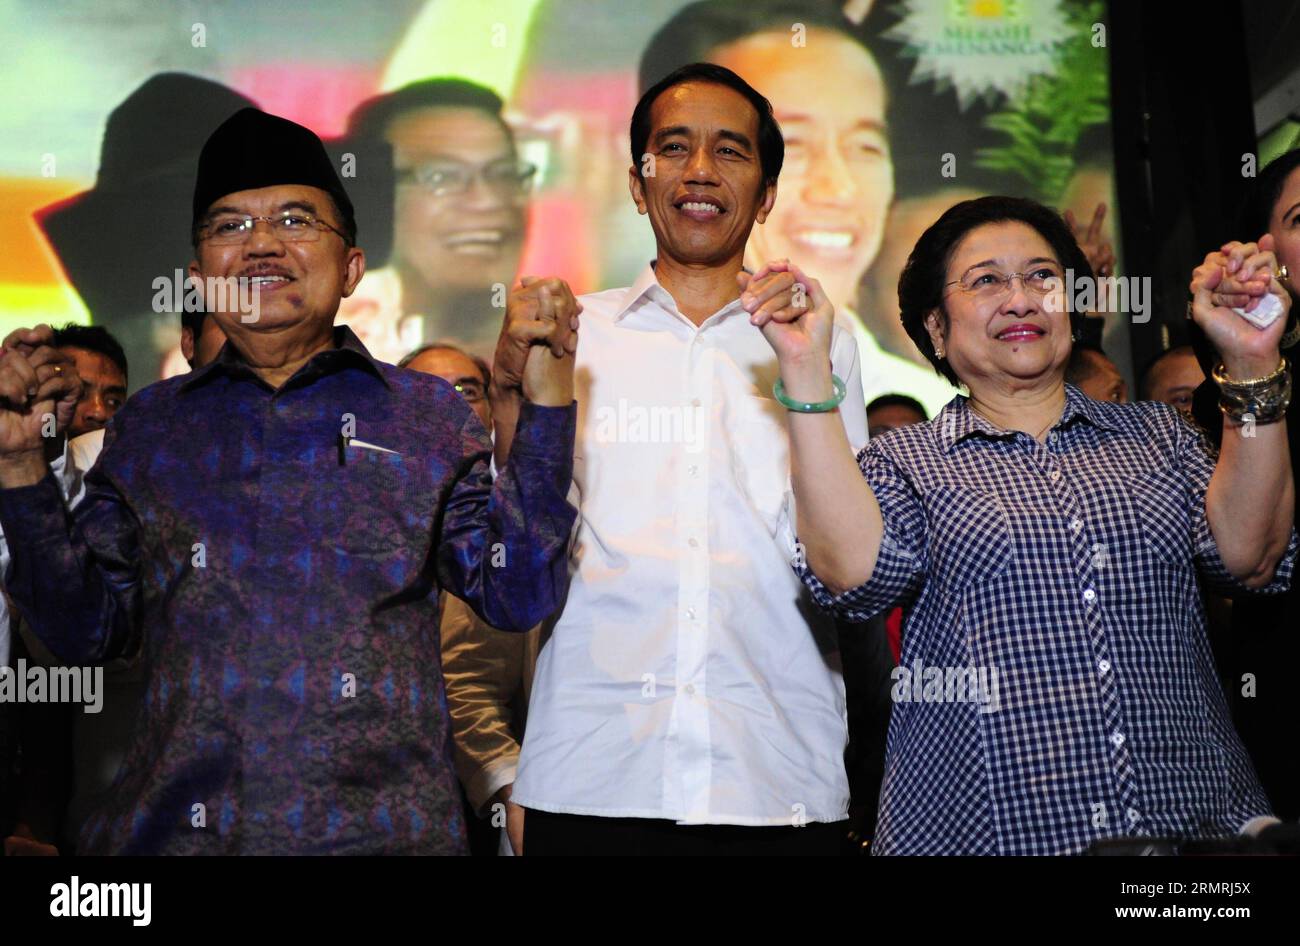 (140722) -- JAKARTA, July 22, 2014 (Xinhua) -- Chairperson of the Indonesian Democratic Party of Struggle (PDIP) Megawati Soekarnoputri (R), Indonesia s presidential candidate from the PDIP Joko Widodo (C) and his running mate Jusuf Kalla (L) hold hands during a press conference ahead of announcement of recapitulation 2014 presidential election in Jakarta, Indonesia, July 22, 2014. The General Election Commission (KPU) is scheduled to release the vote tally results this afternoon, qualifying the winner of election. (Xinhua/Zulkarnain) (lmz) INDONESIA-JAKARTA-PRESIDENT ELECTION-JOKO WIDODO PUBL Stock Photo